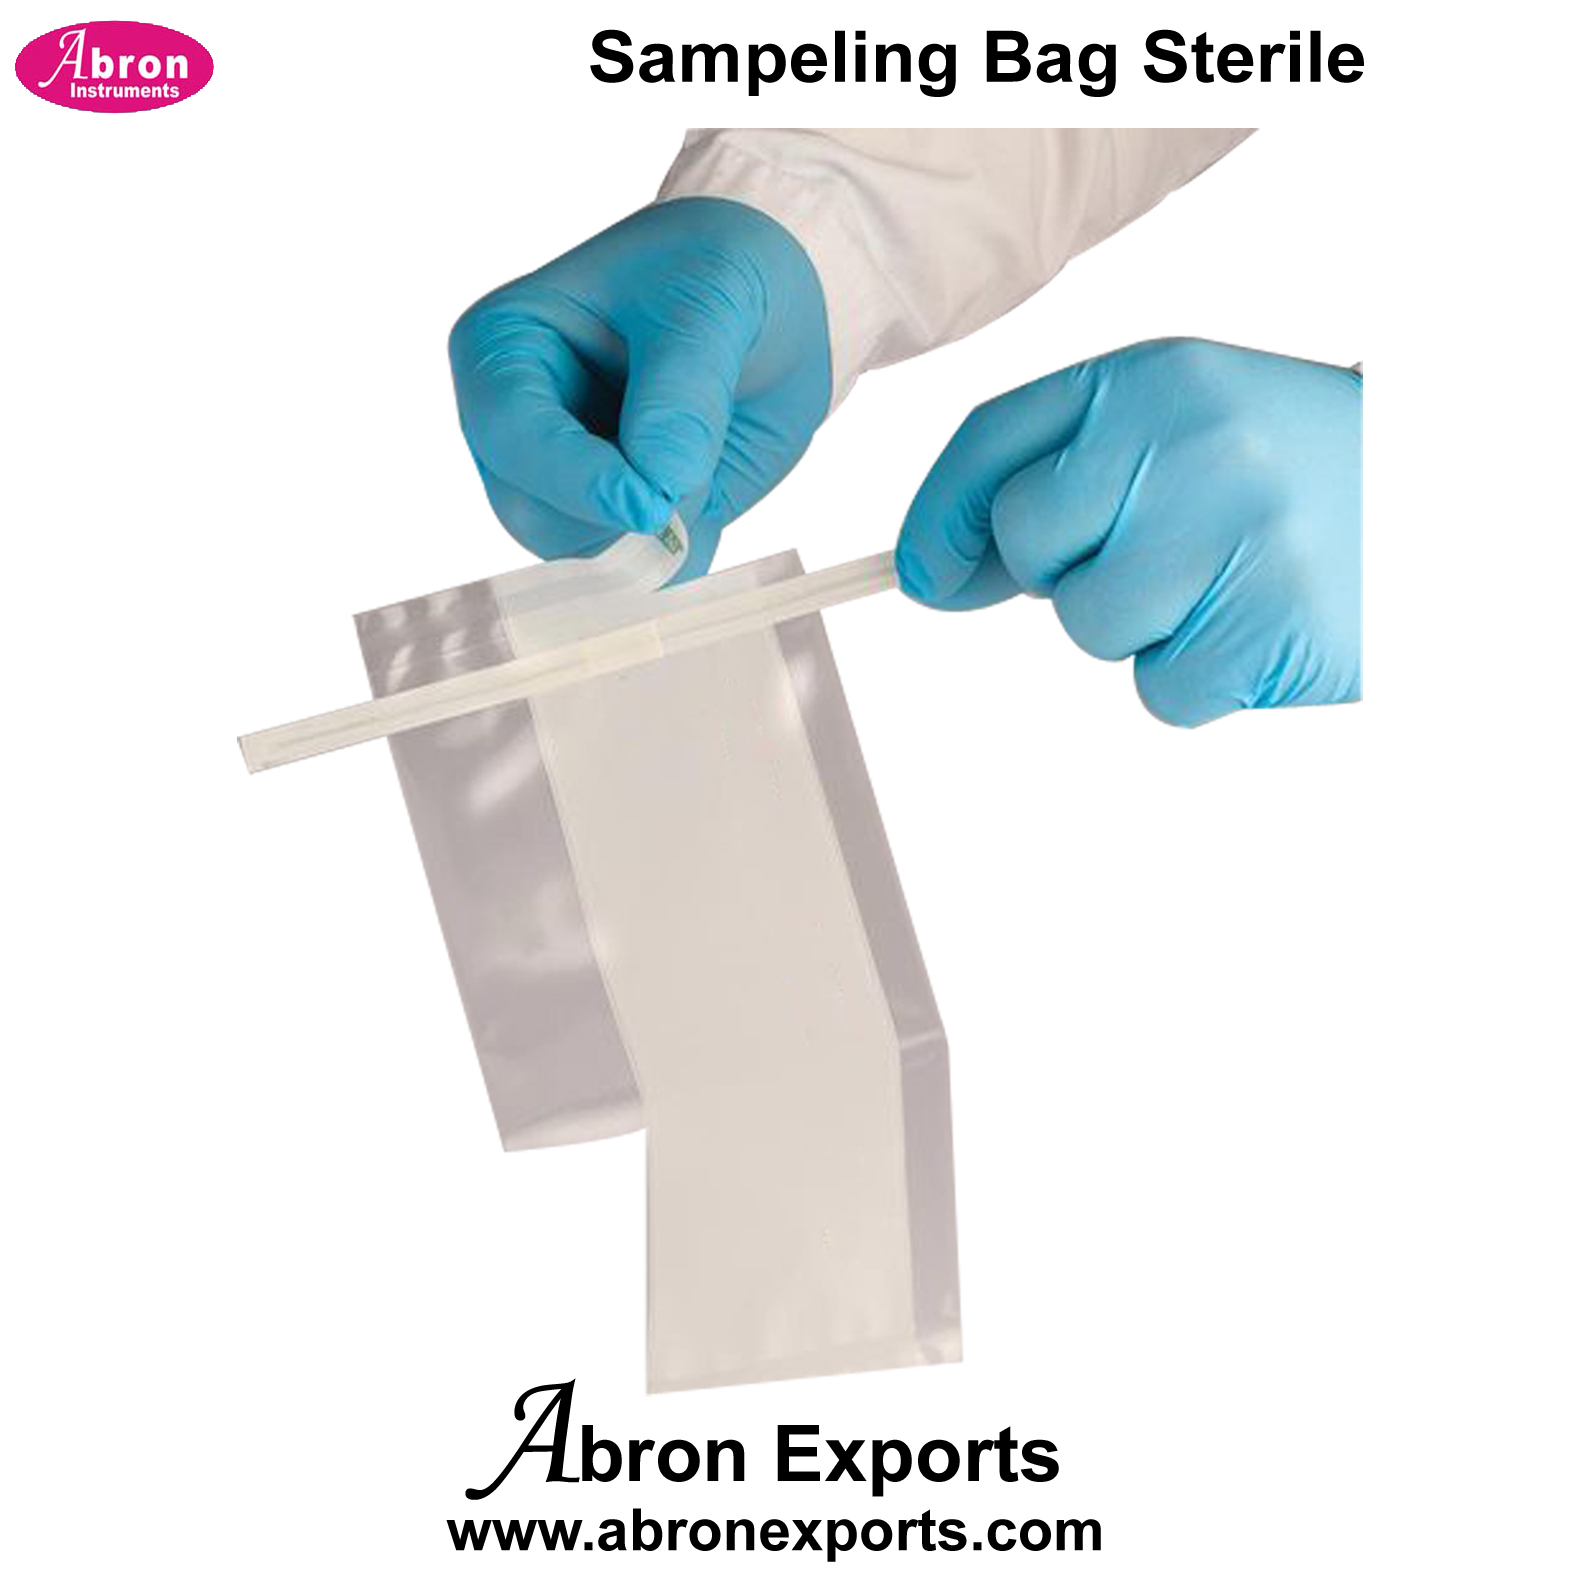 Hospital Disposable Bags sterile for sample food industry with white pack strip sealing 1000 pc Abron ABM-2425BS 